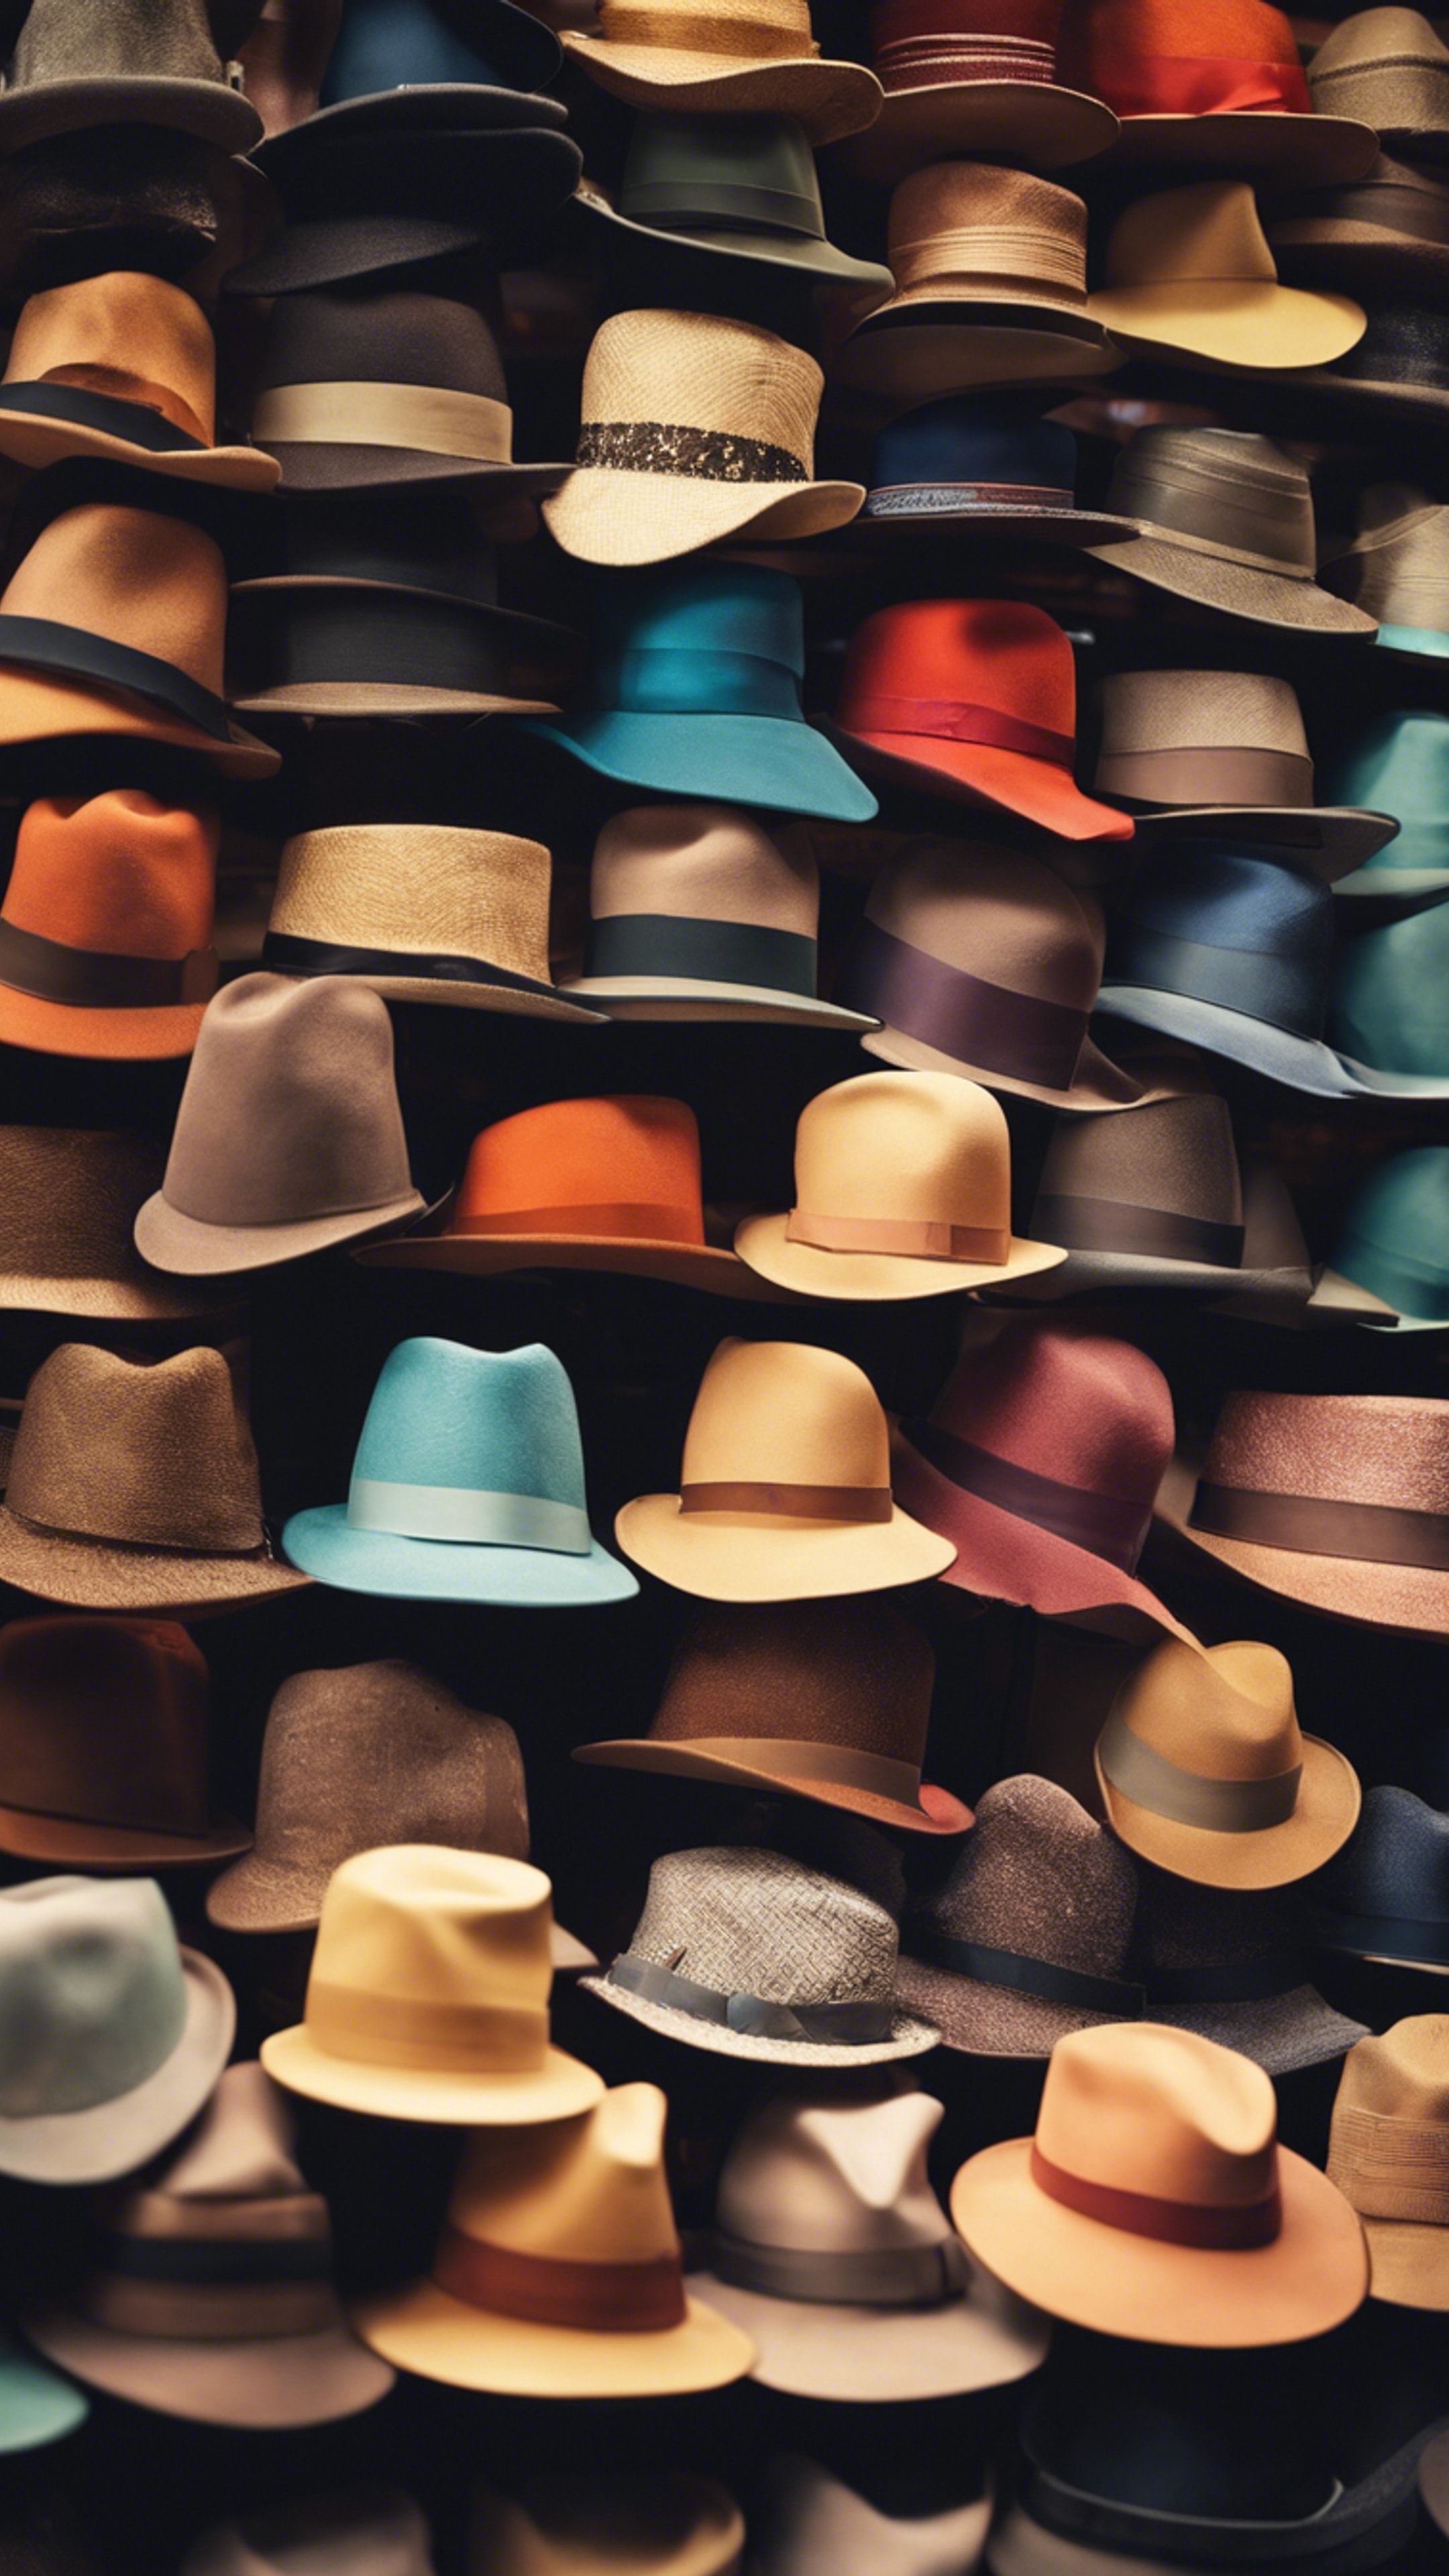 A vintage hat shop with rows of colorful hats lit by soft tungsten light. Wallpaper[1fc8a0055a0047beb9ef]